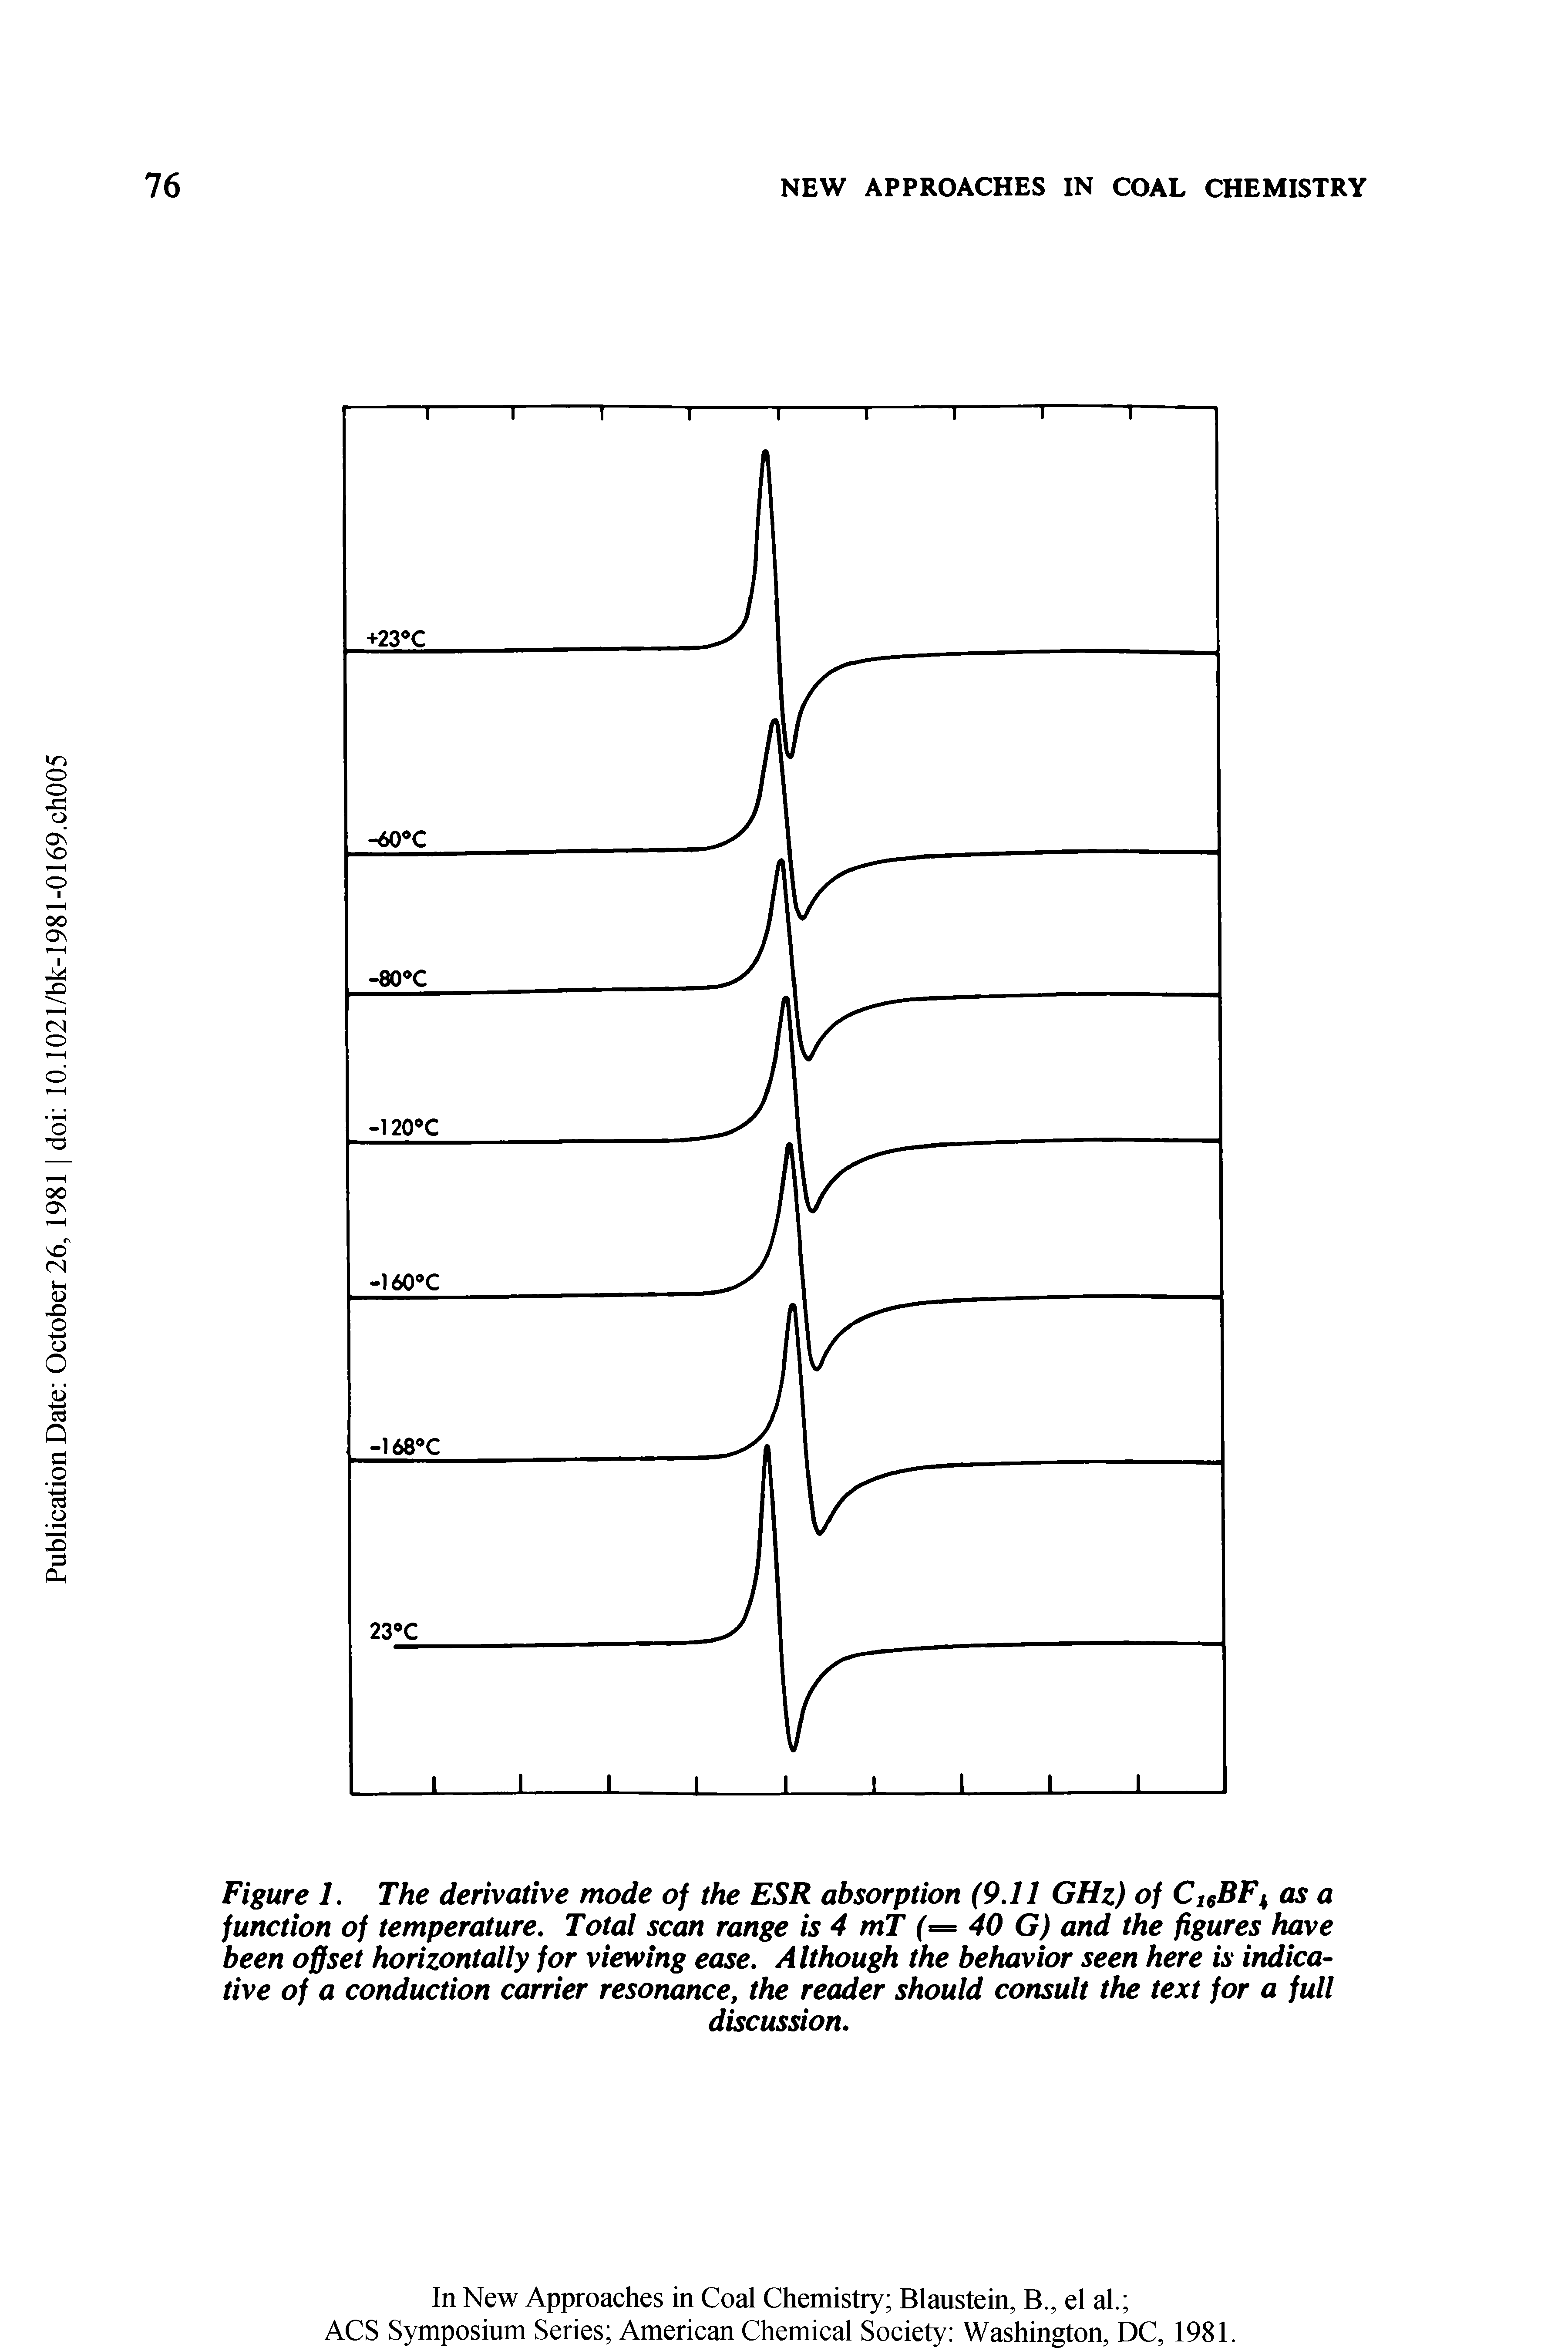 Figure 1. The derivative mode of the ESR absorption (9.11 GHz) of C16BFk as a function of temperature. Total scan range is 4 mT (= 40 G) and the figures have been offset horizontally for viewing ease. Although the behavior seen here is indicative of a conduction carrier resonance, the reader should consult the text for a full...